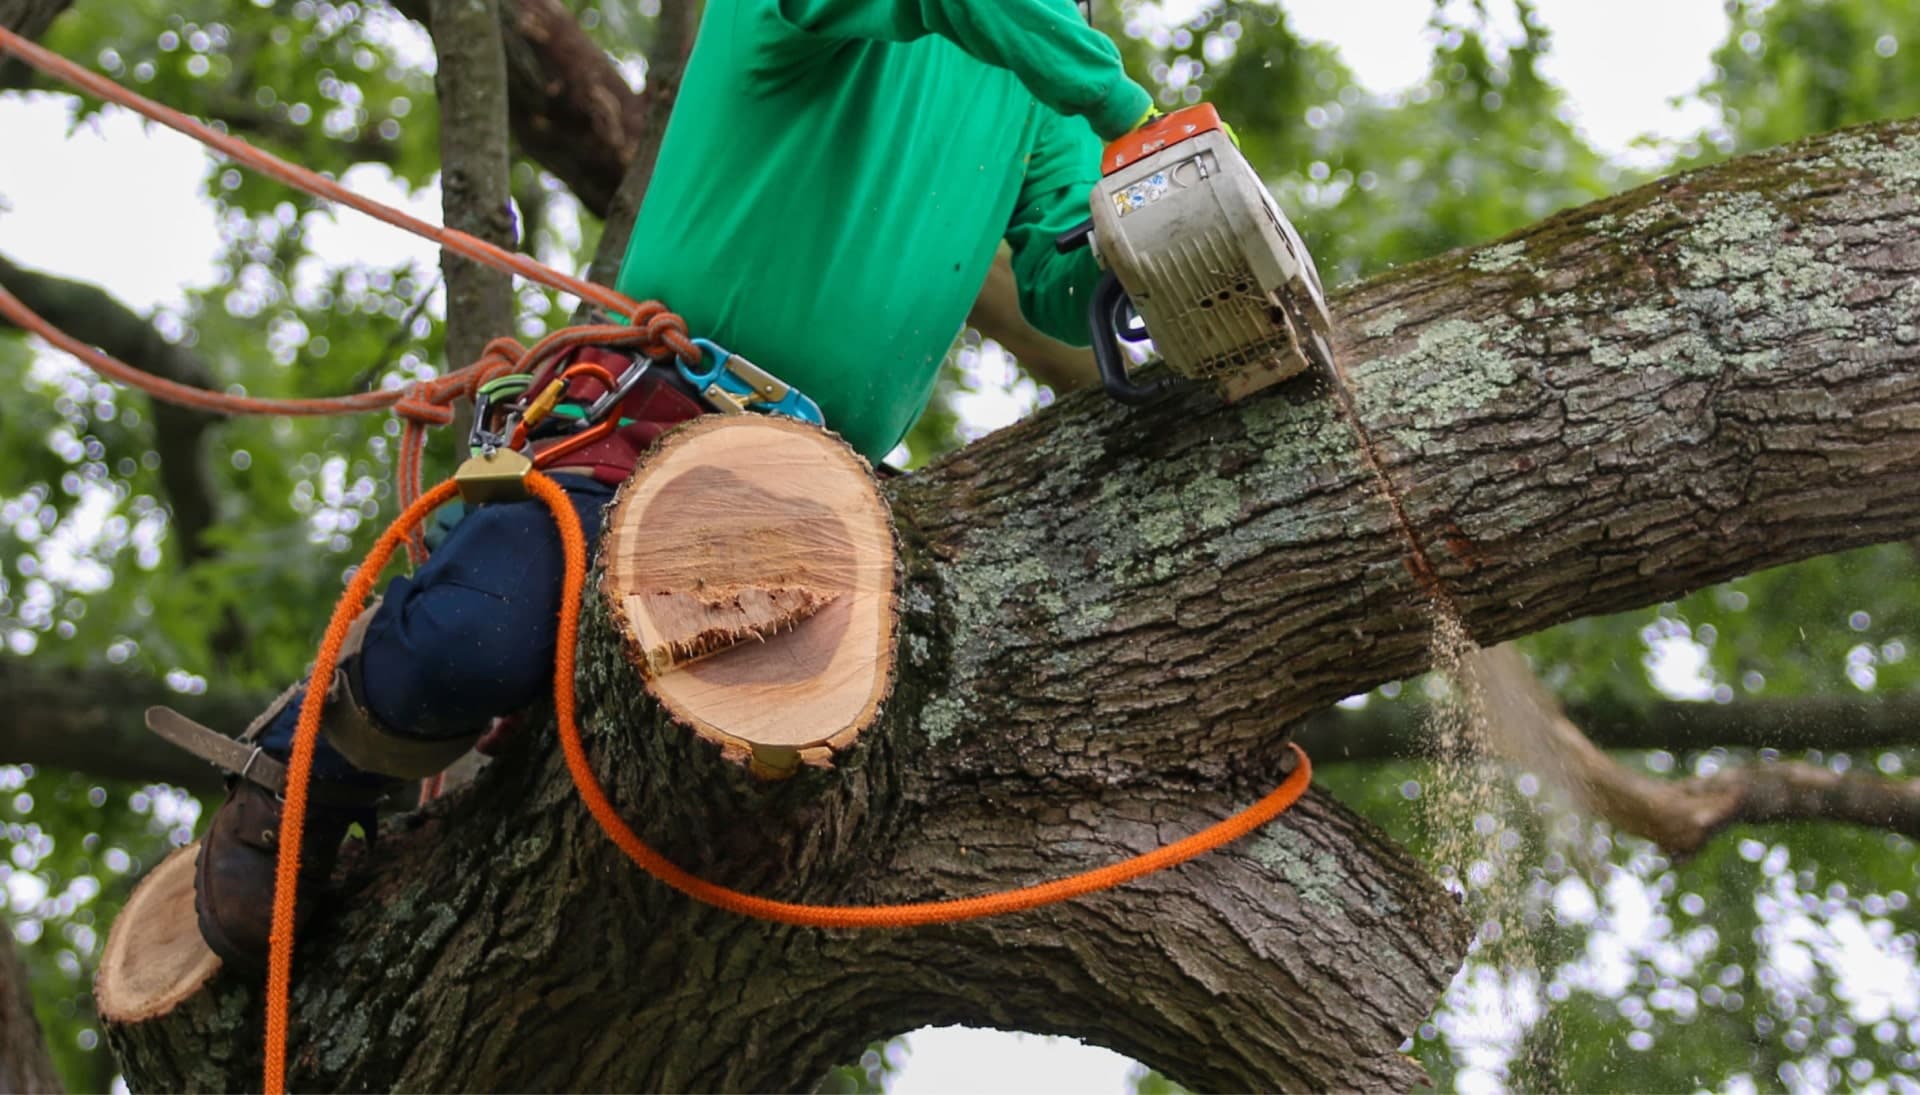 Shed your worries away with best tree removal in Naperville